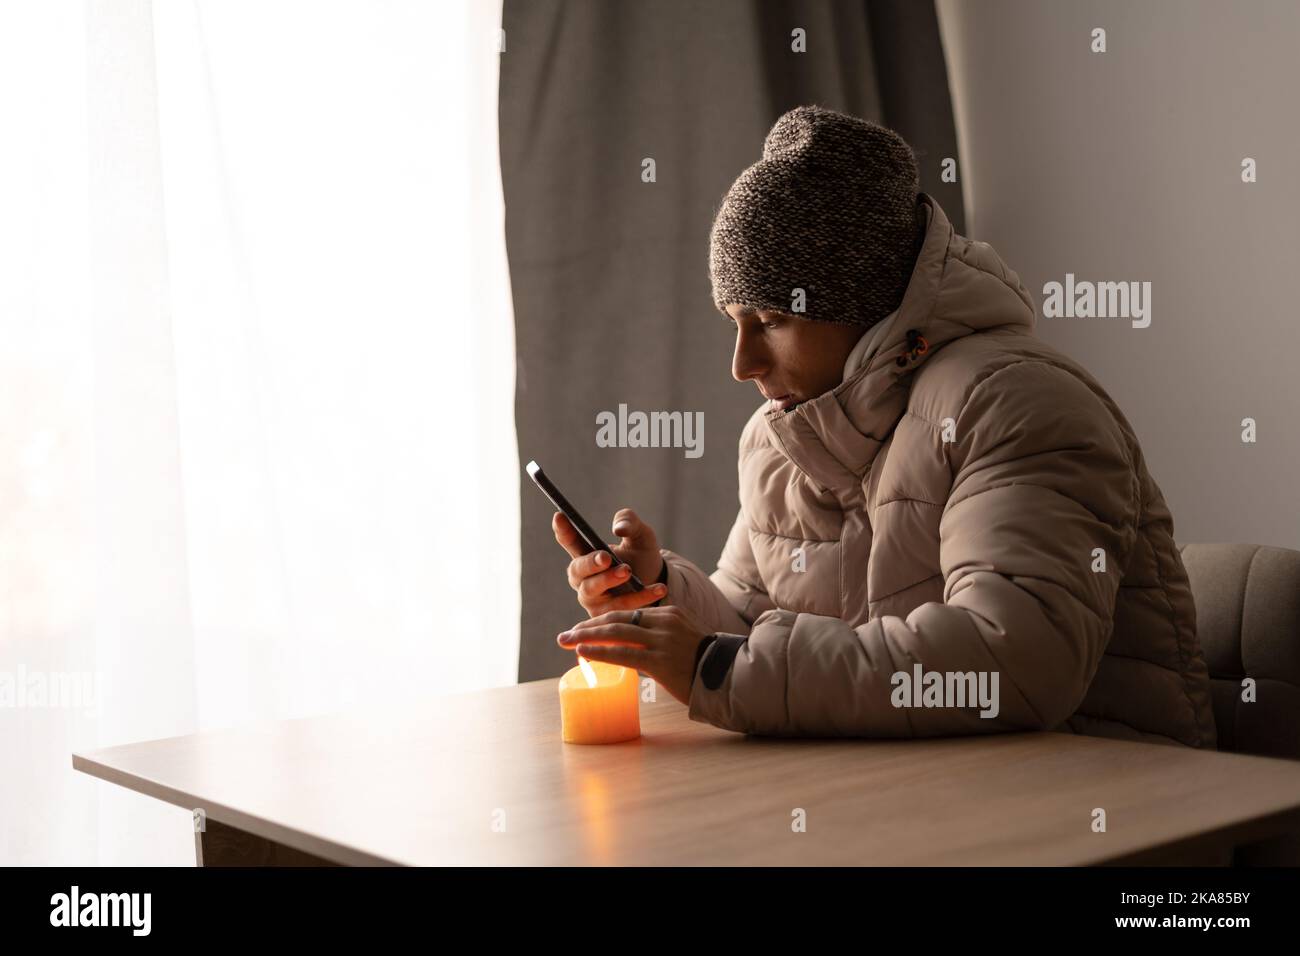 Sick young man feel cold wearing at warm clothes watching movie on smartphone, annoyed guy shiver freezing warming at home wrapped with plaid, problem Stock Photo